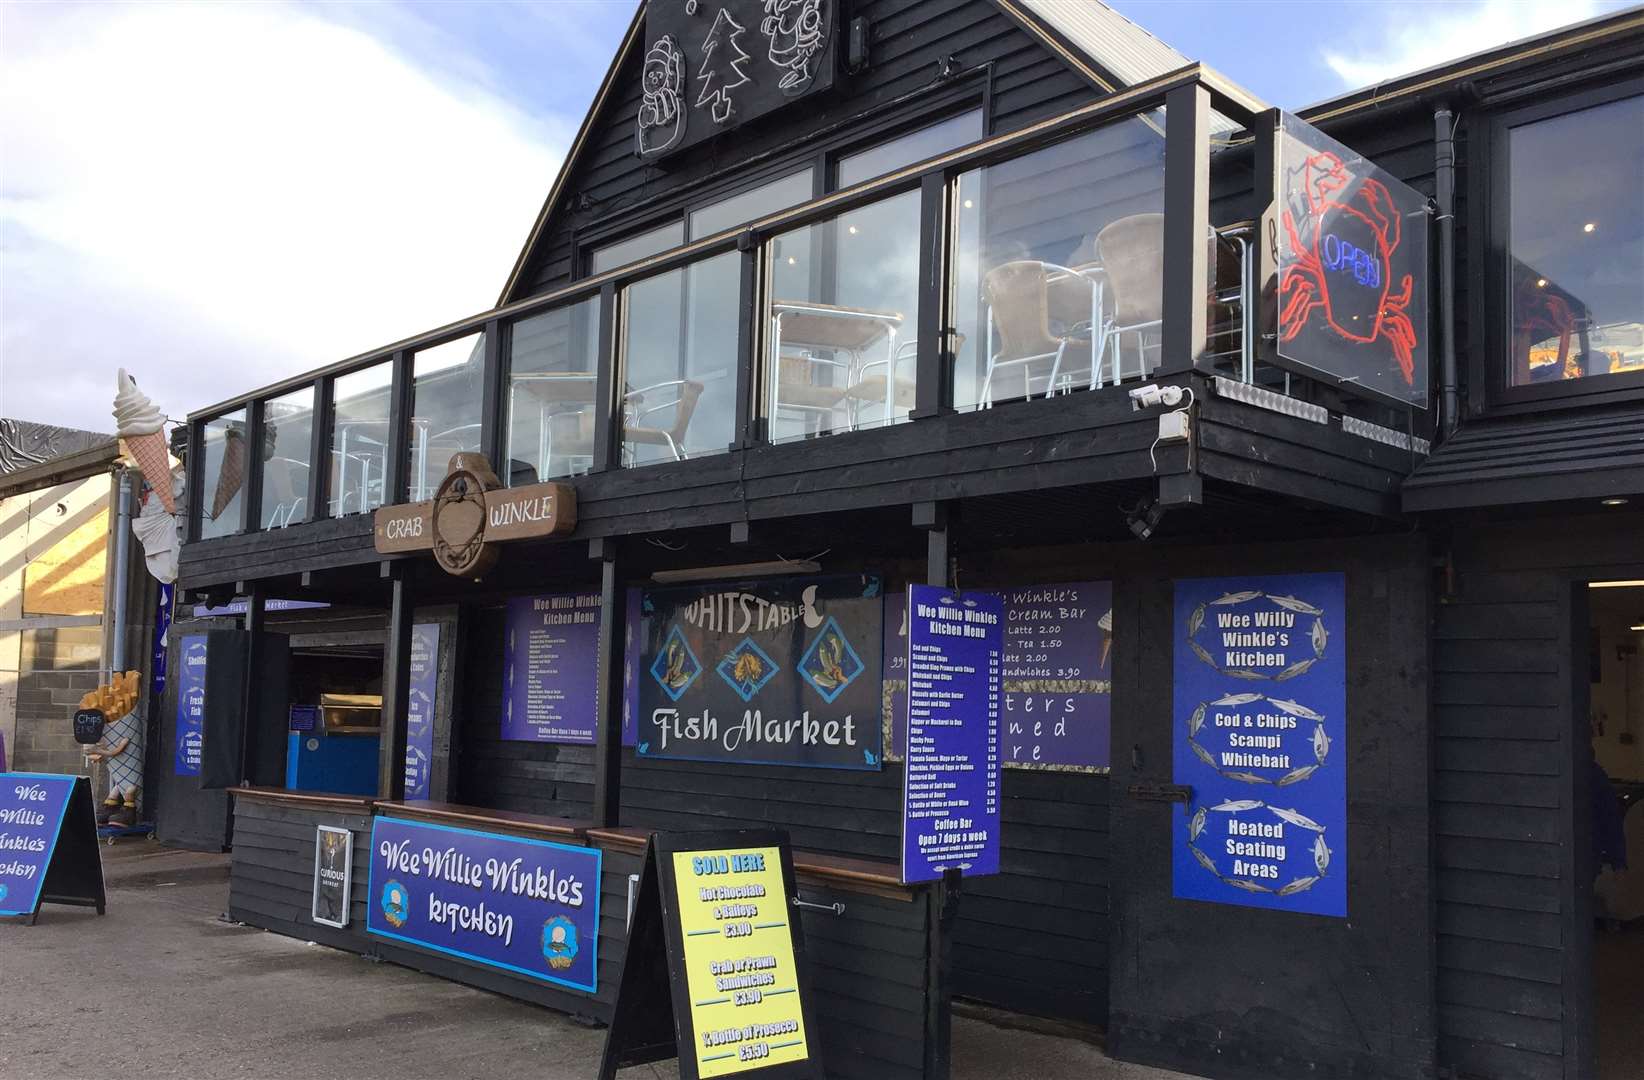 The Crab and Winkle has been running in Whitstable Harbour for more than two decades